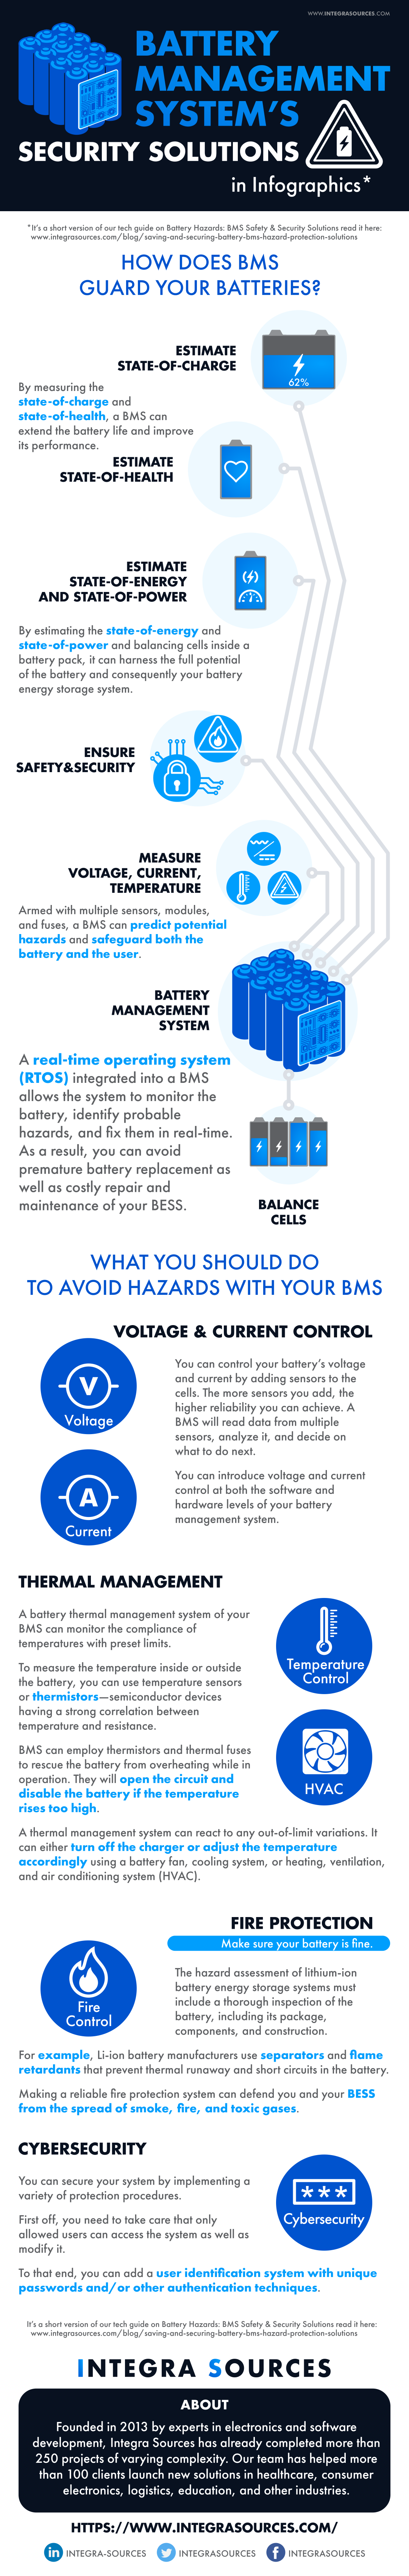 The BMS safeguards the battery against under- and overvoltage, overcurrent, under- and overtemperature, and spontaneous ignition, as well as addressing cyber security concerns. 